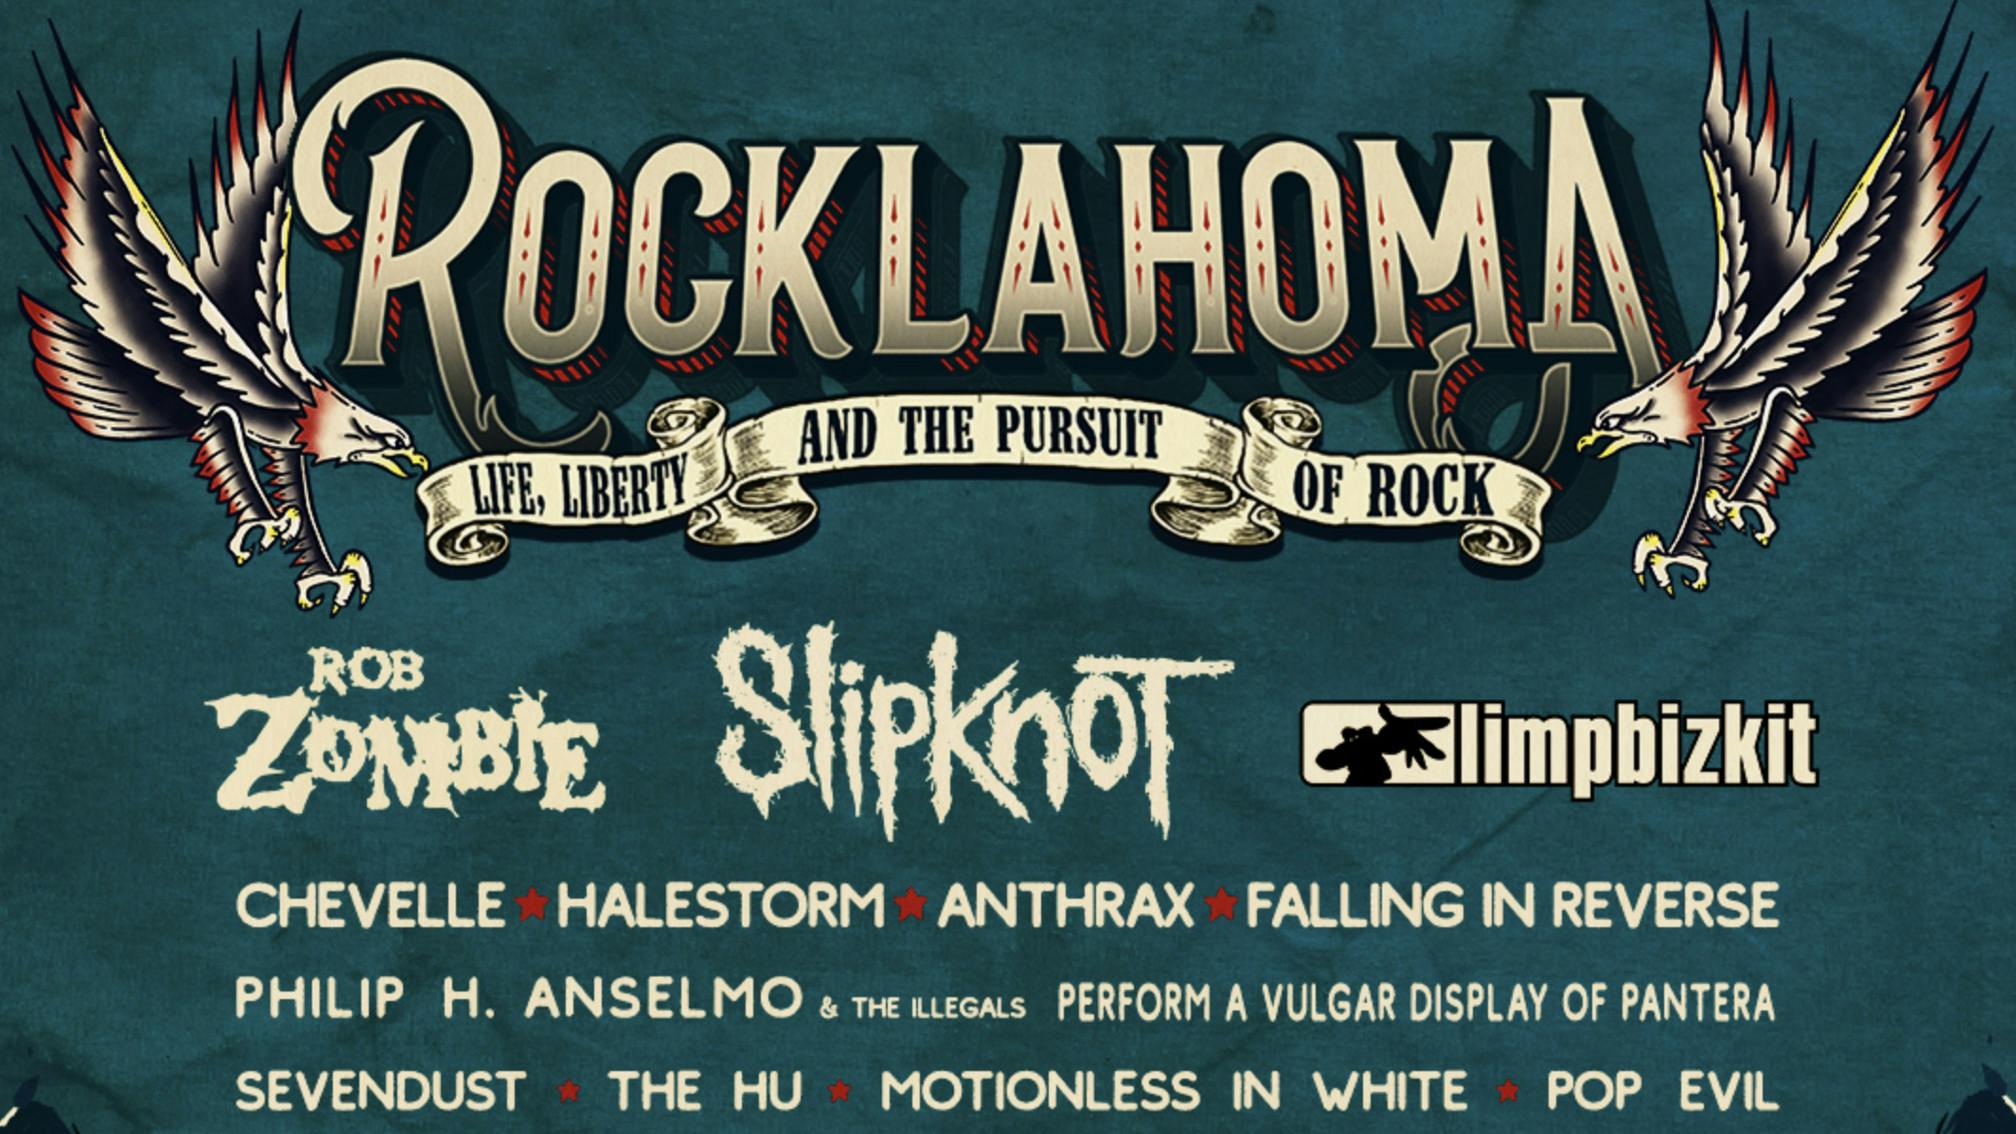 Slipknot, Rob Zombie, Limp Bizkit and more announced for Rocklahoma 2021